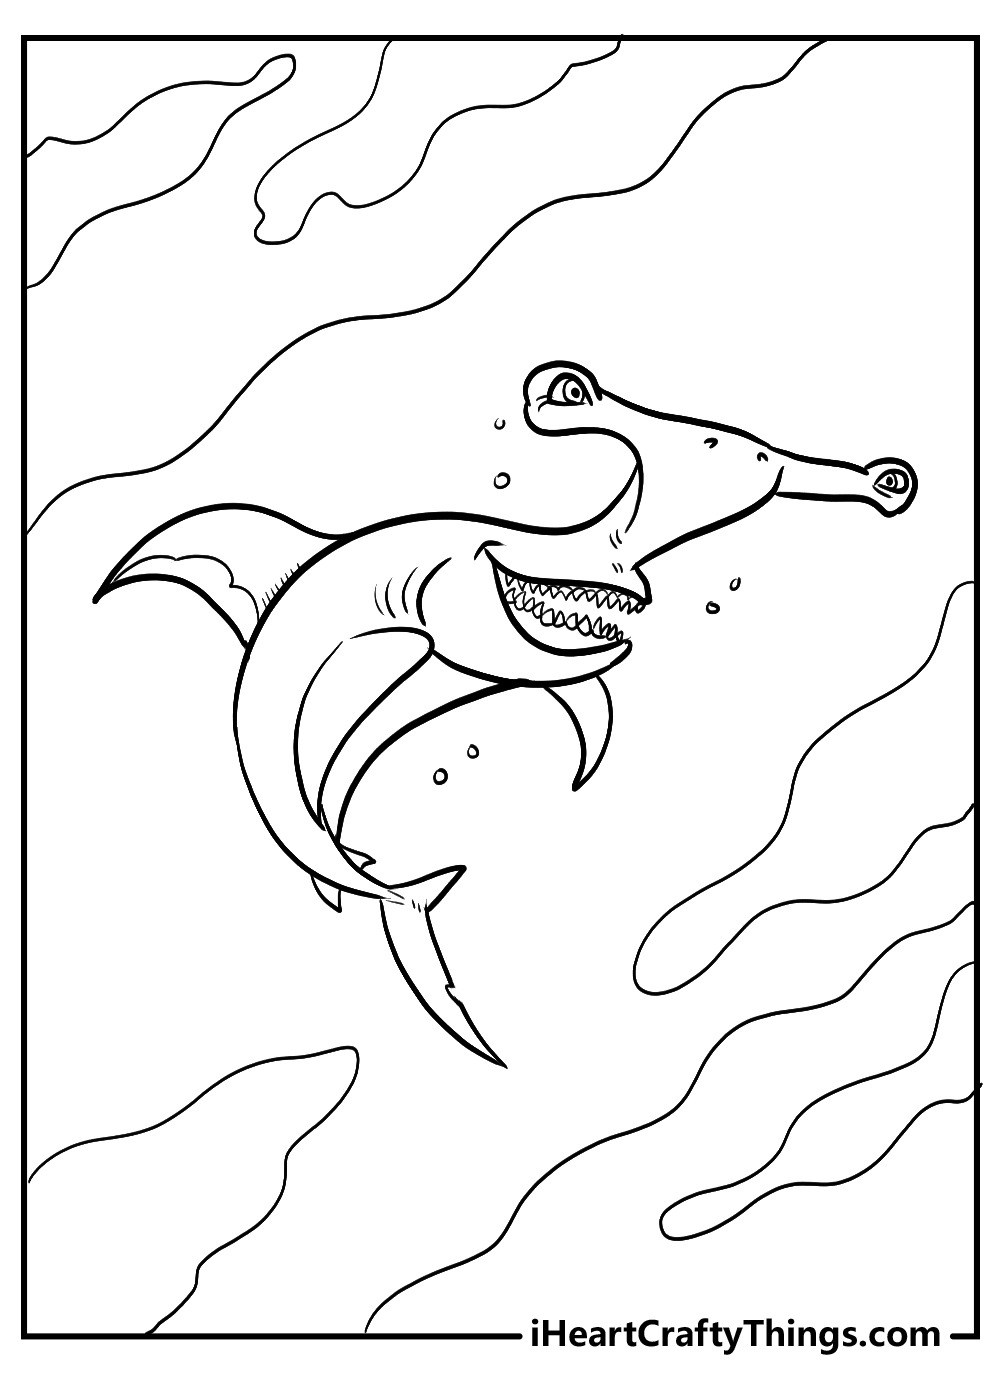 hammerhead shark finding nemo coloring pages